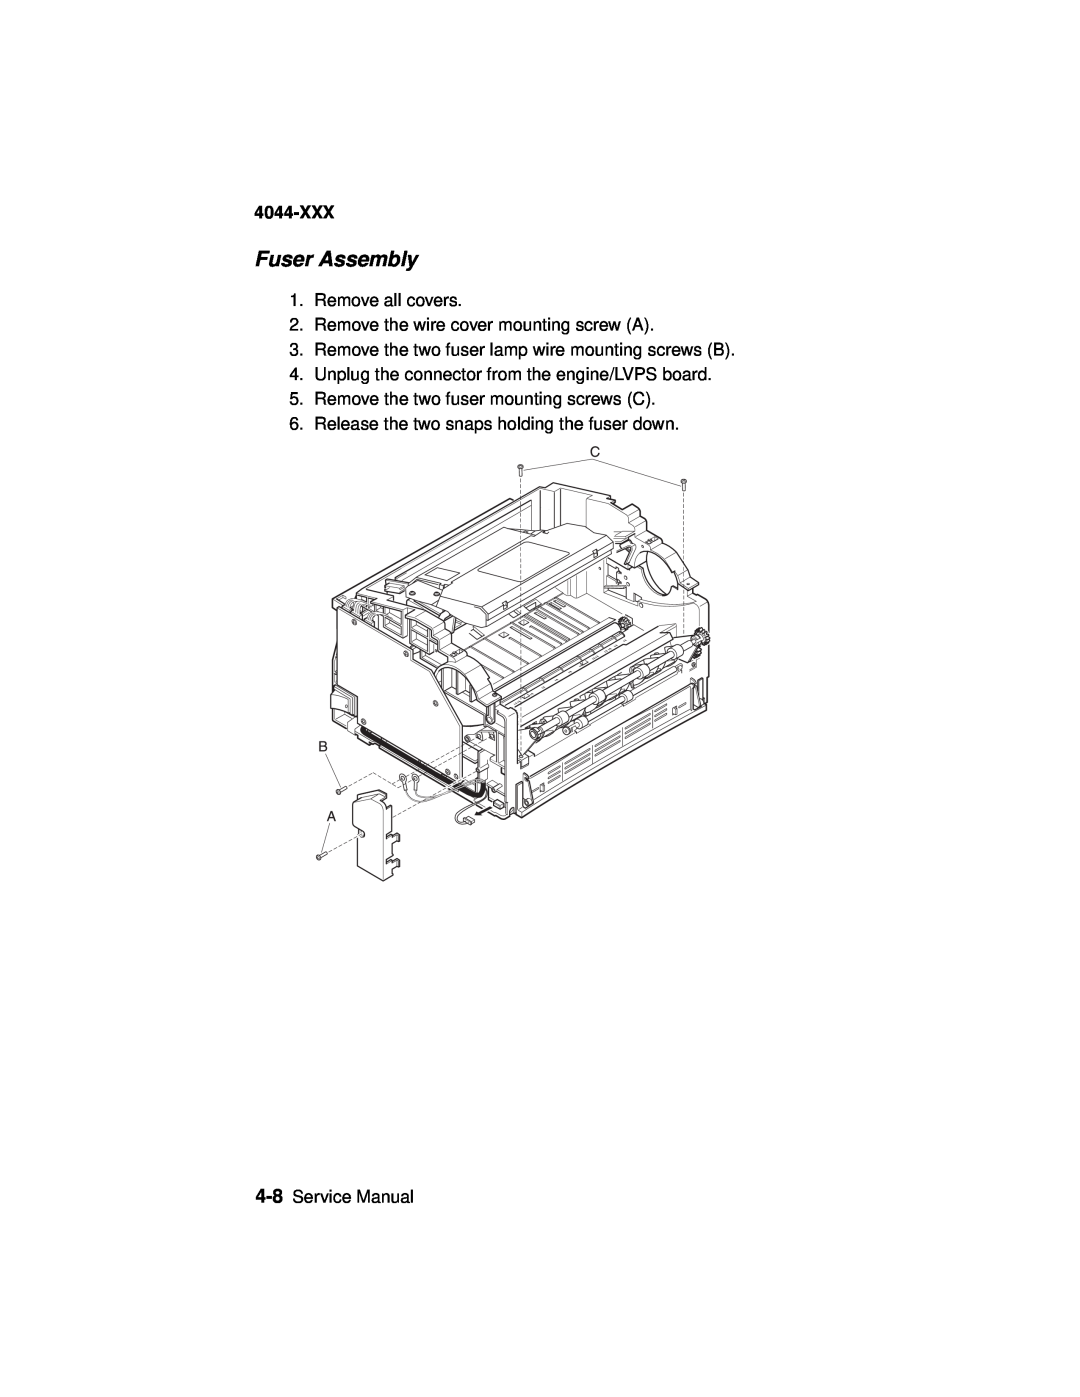 Lexmark 4044-XXX, E310 manual Fuser Assembly, Remove all covers, Remove the wire cover mounting screw A, Service Manual 